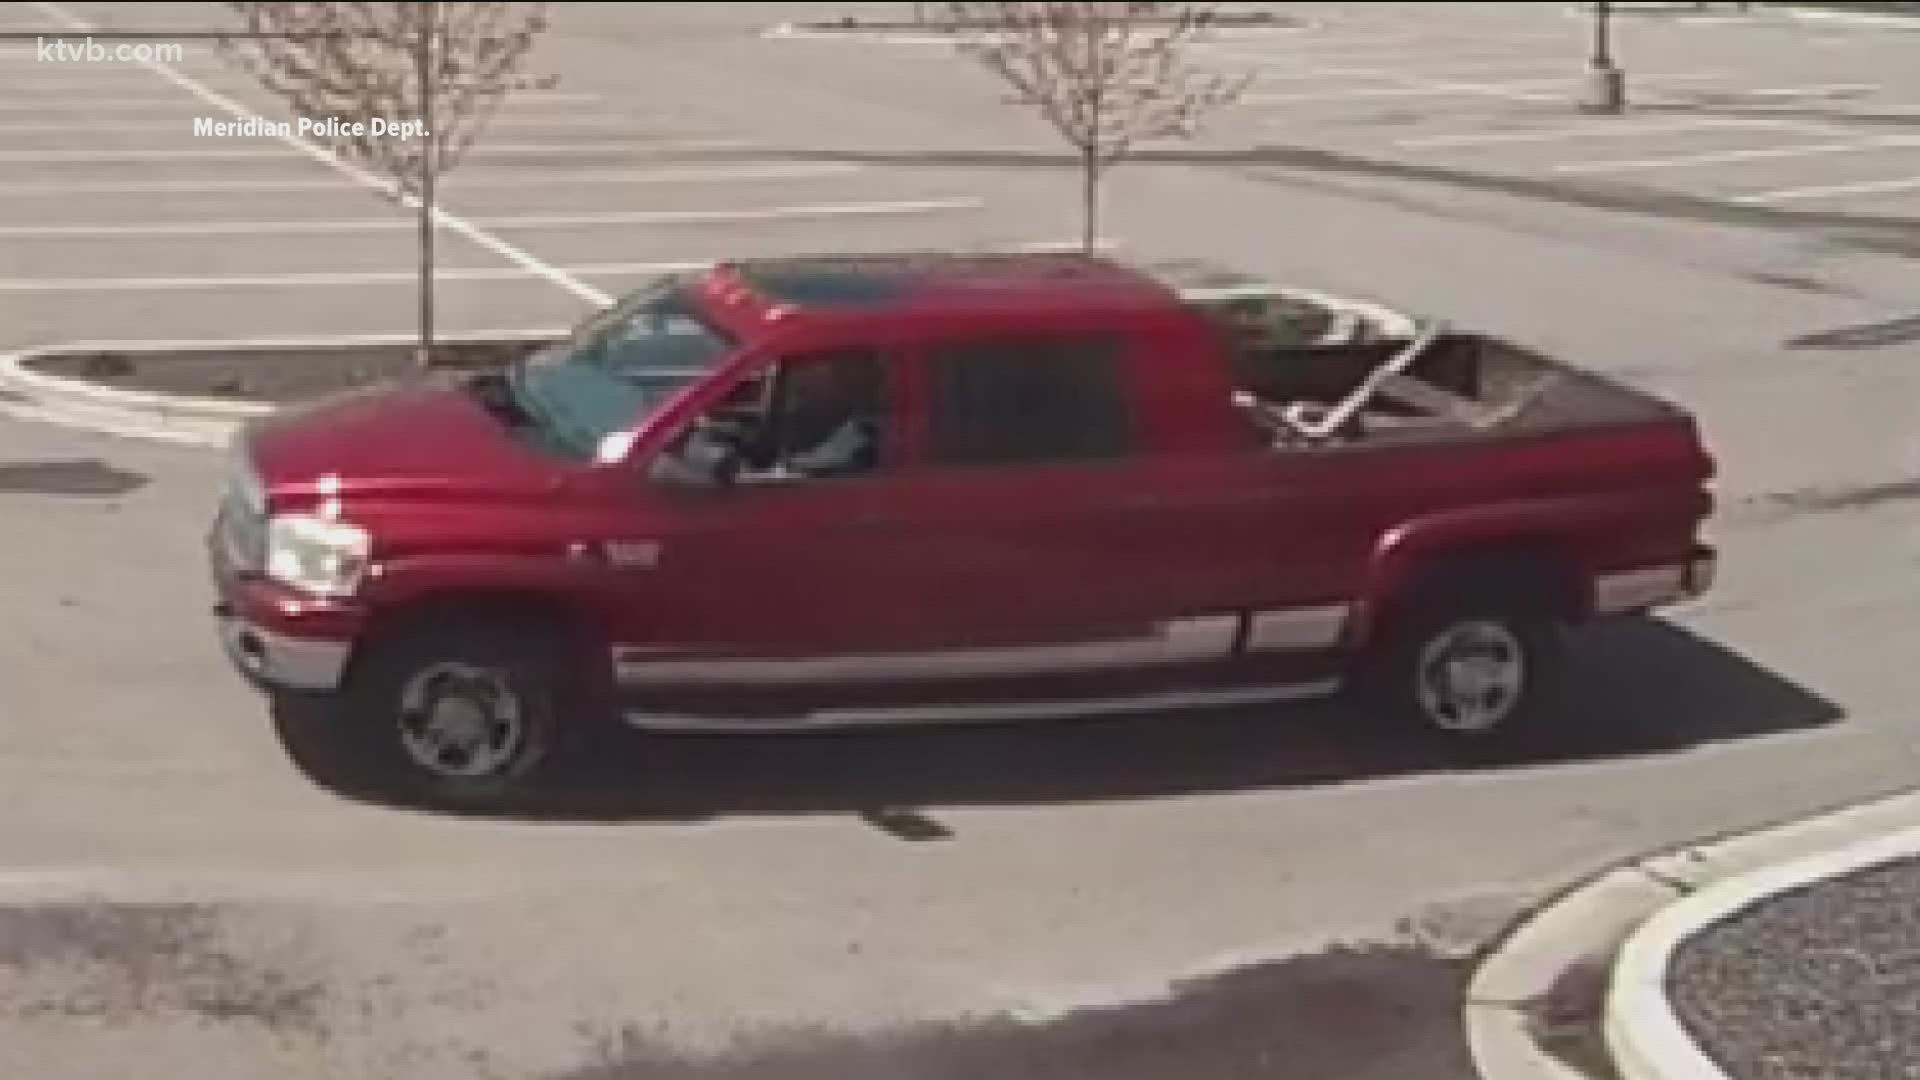 Meridian Police say the man attempted to convince the 14-year-old girl to get in the Dodge multiple times at a Park and Ride in Meridian on April 26.